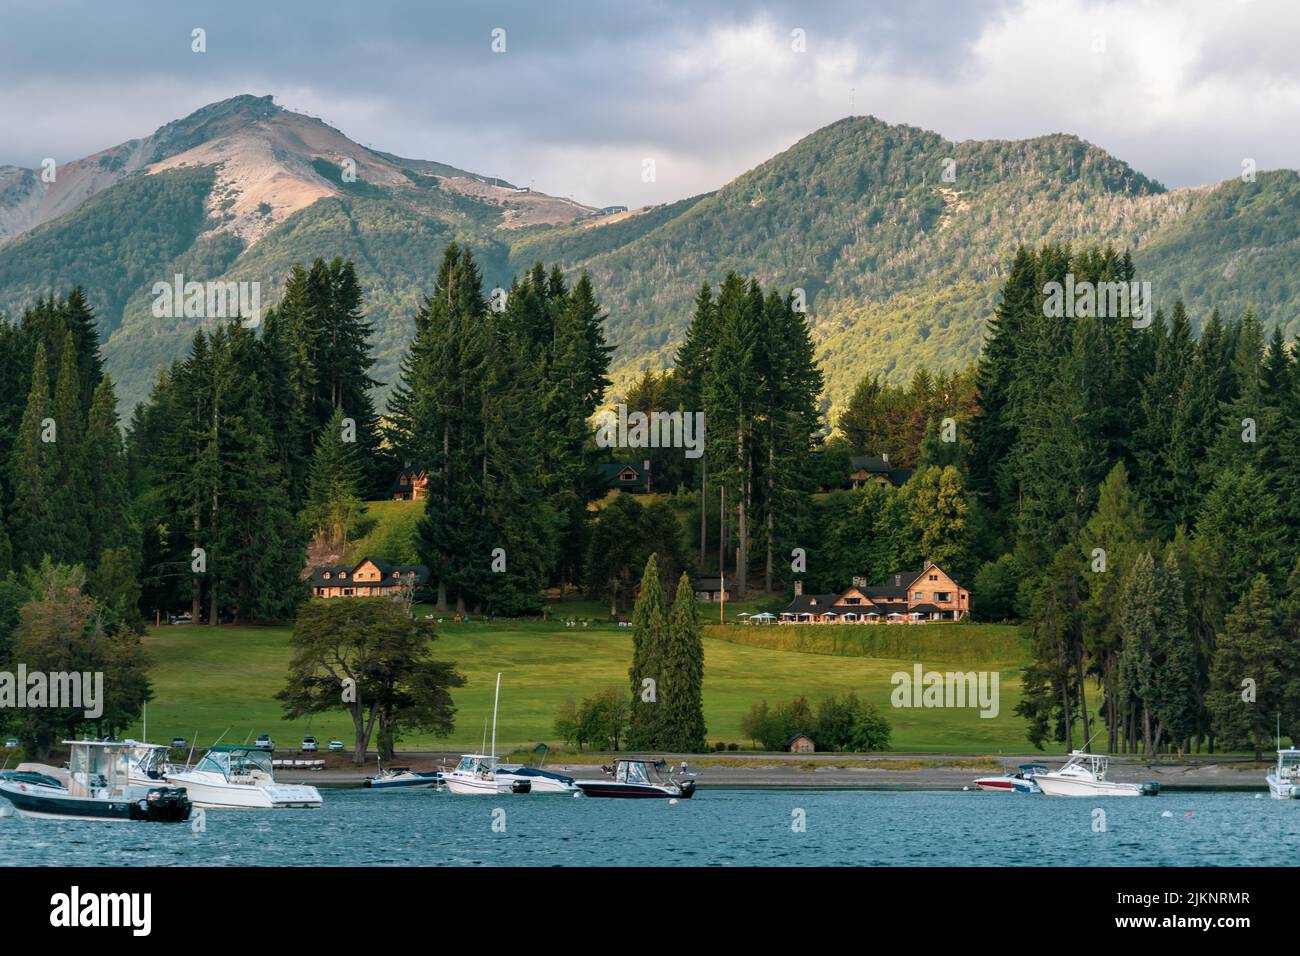 A beautiful view of Cumelen Country Club on a sunny day with mountains and cloudy sky in the background in Villa La Angostura, Neuquen, Argentina Stock Photo